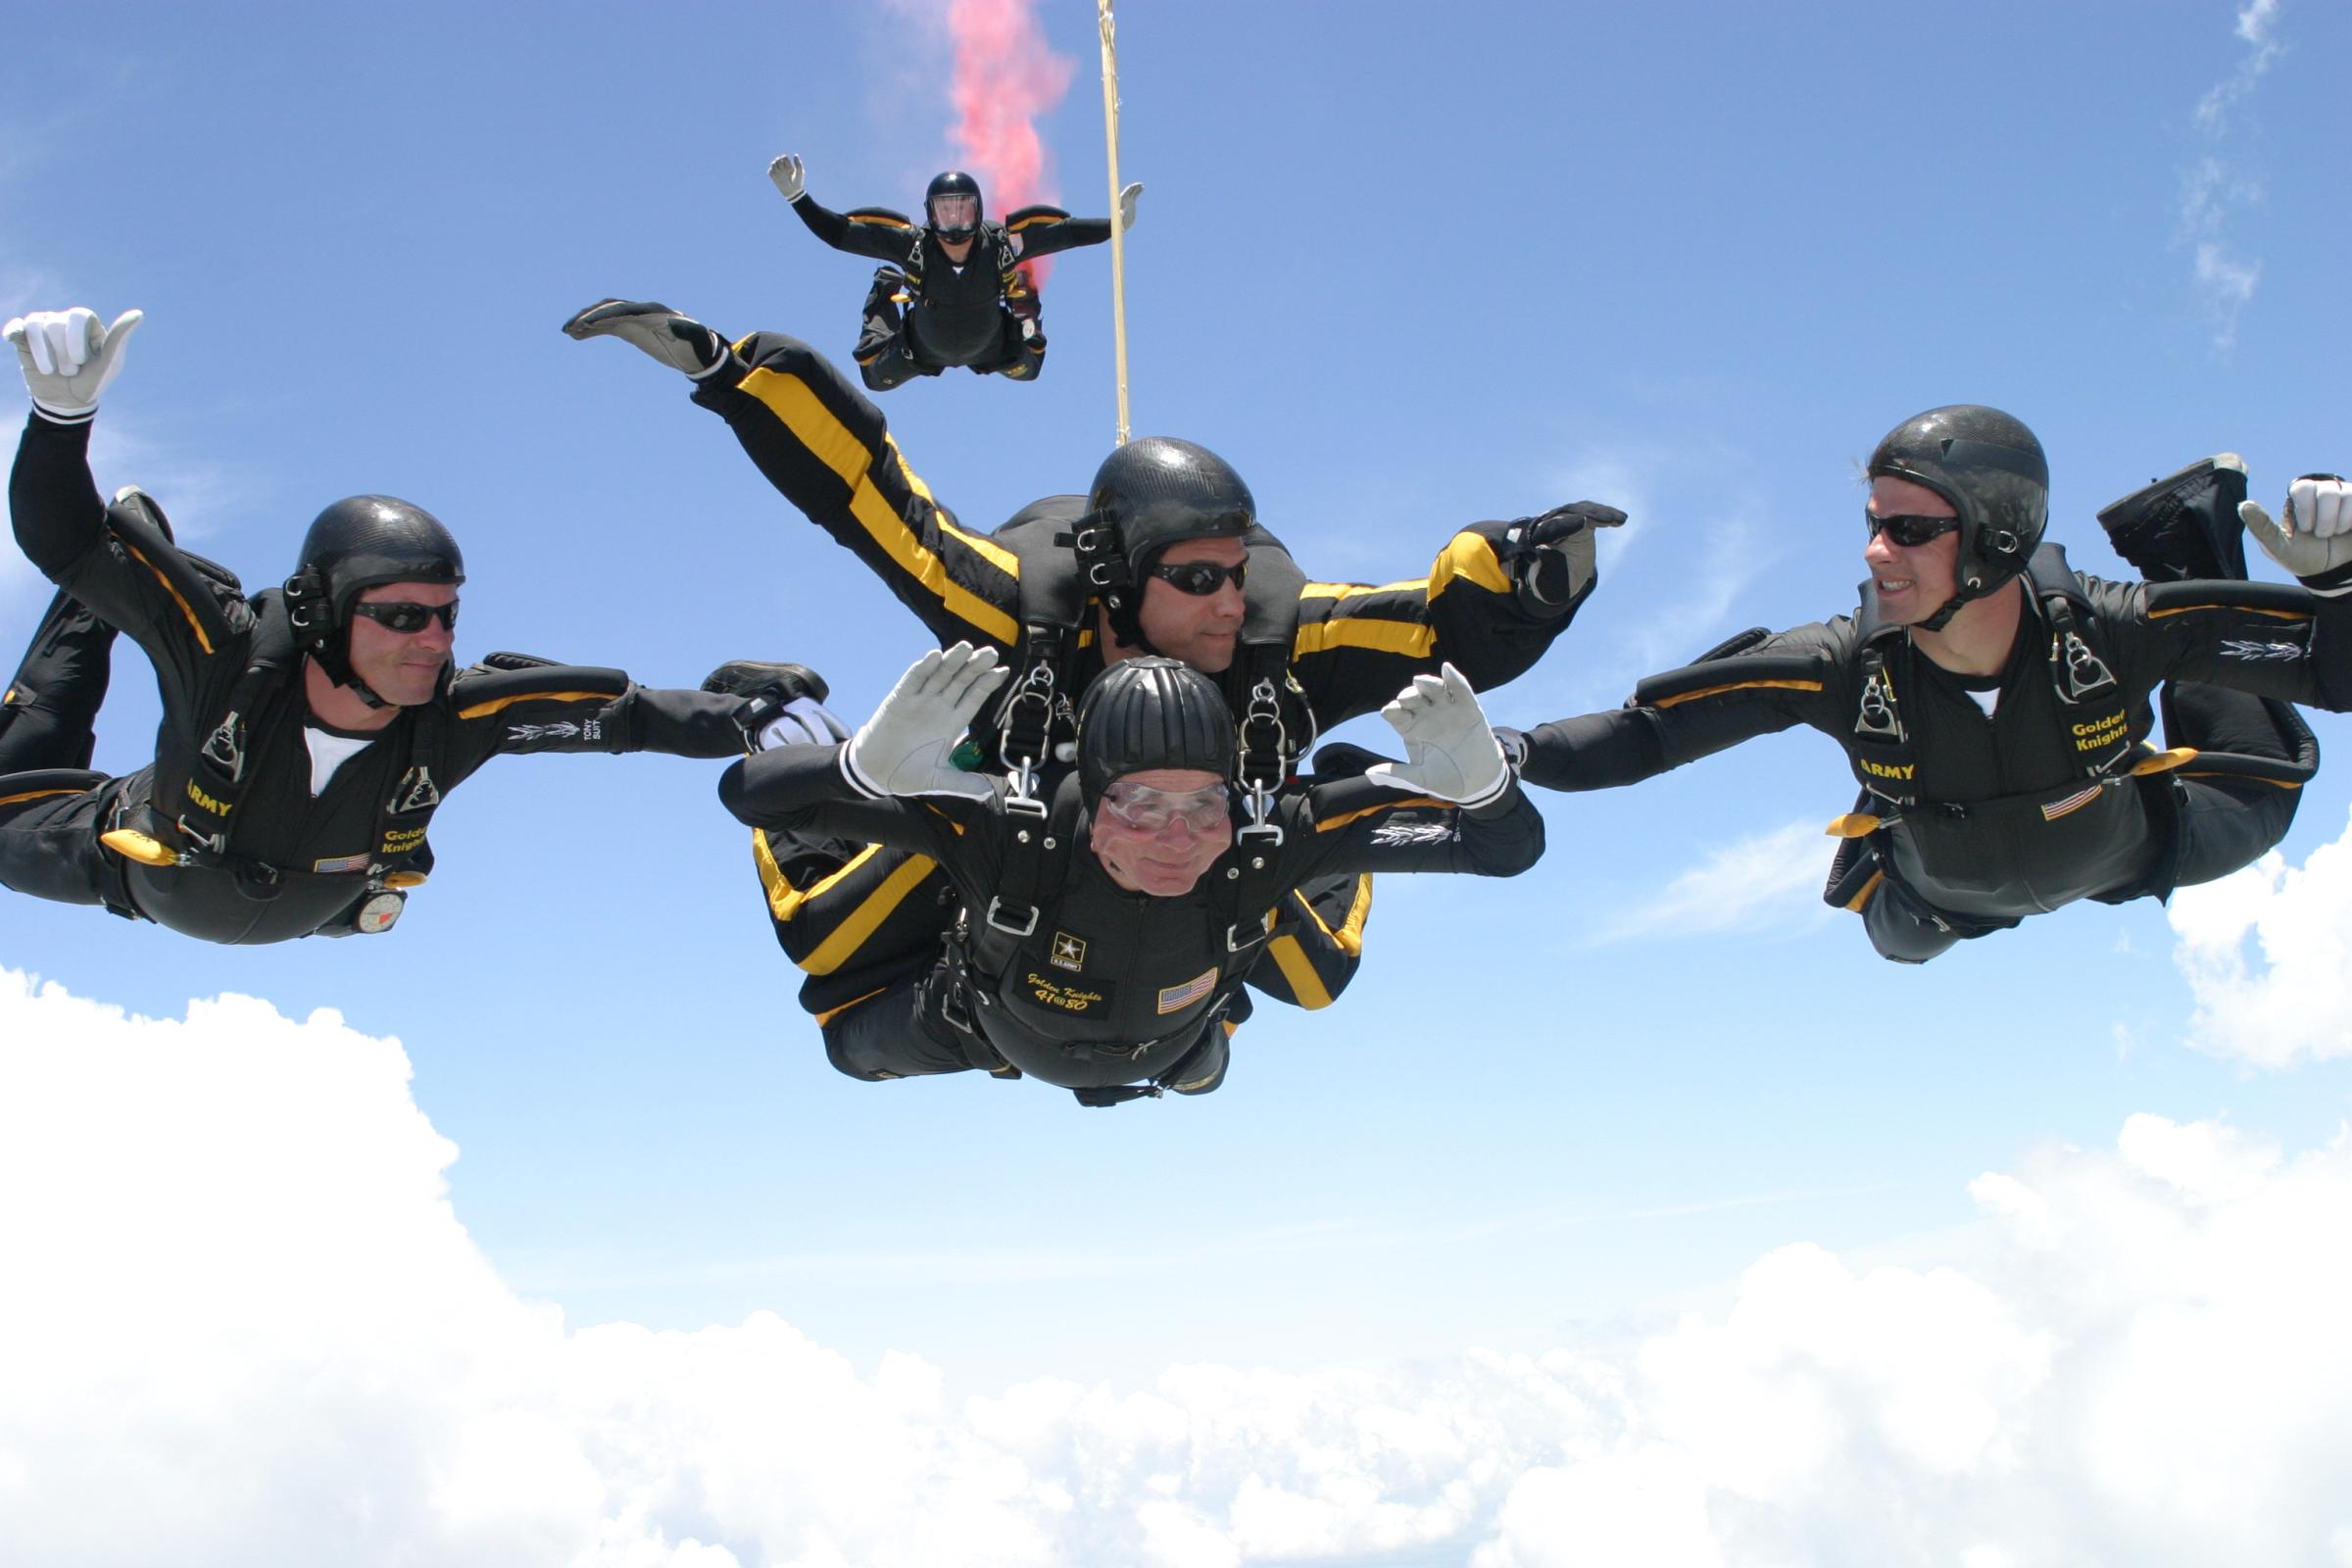 George H.W. Bush celebrates his 80th birthday with a tandem parachute jump over Texas A&amp;M University with the U.S. Army Golden Knights parachute team. on June 13, 2004 in College Station, Texas.